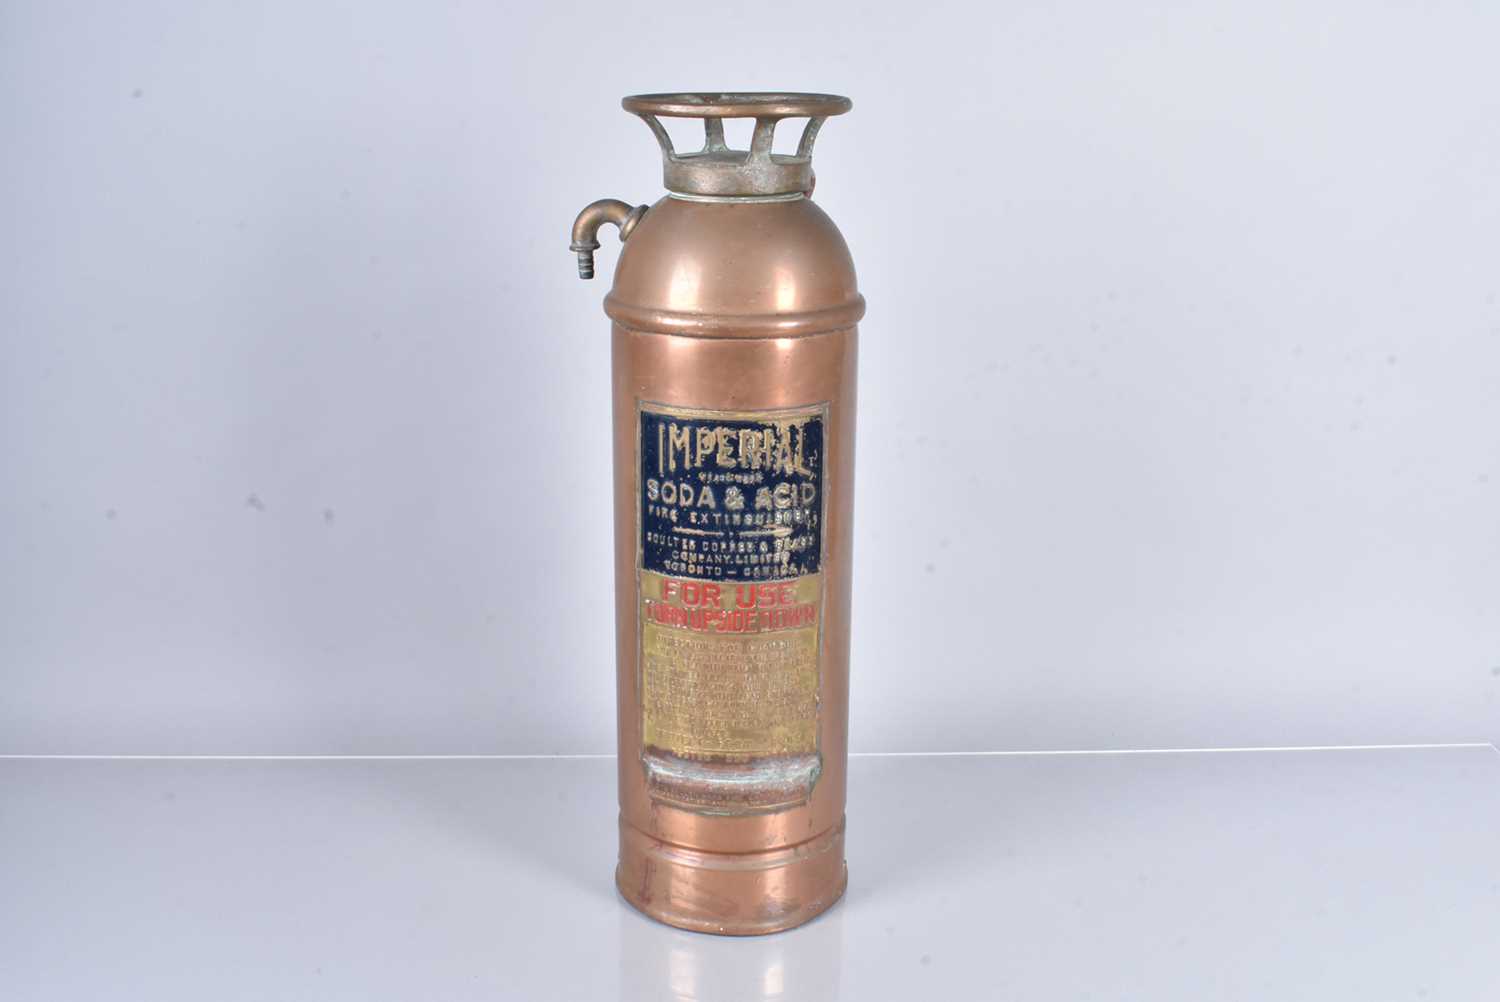 Lot 50 - An Imperial Soda & Acid Fire Extinguisher by Coulter Copper & Brass Company Limited